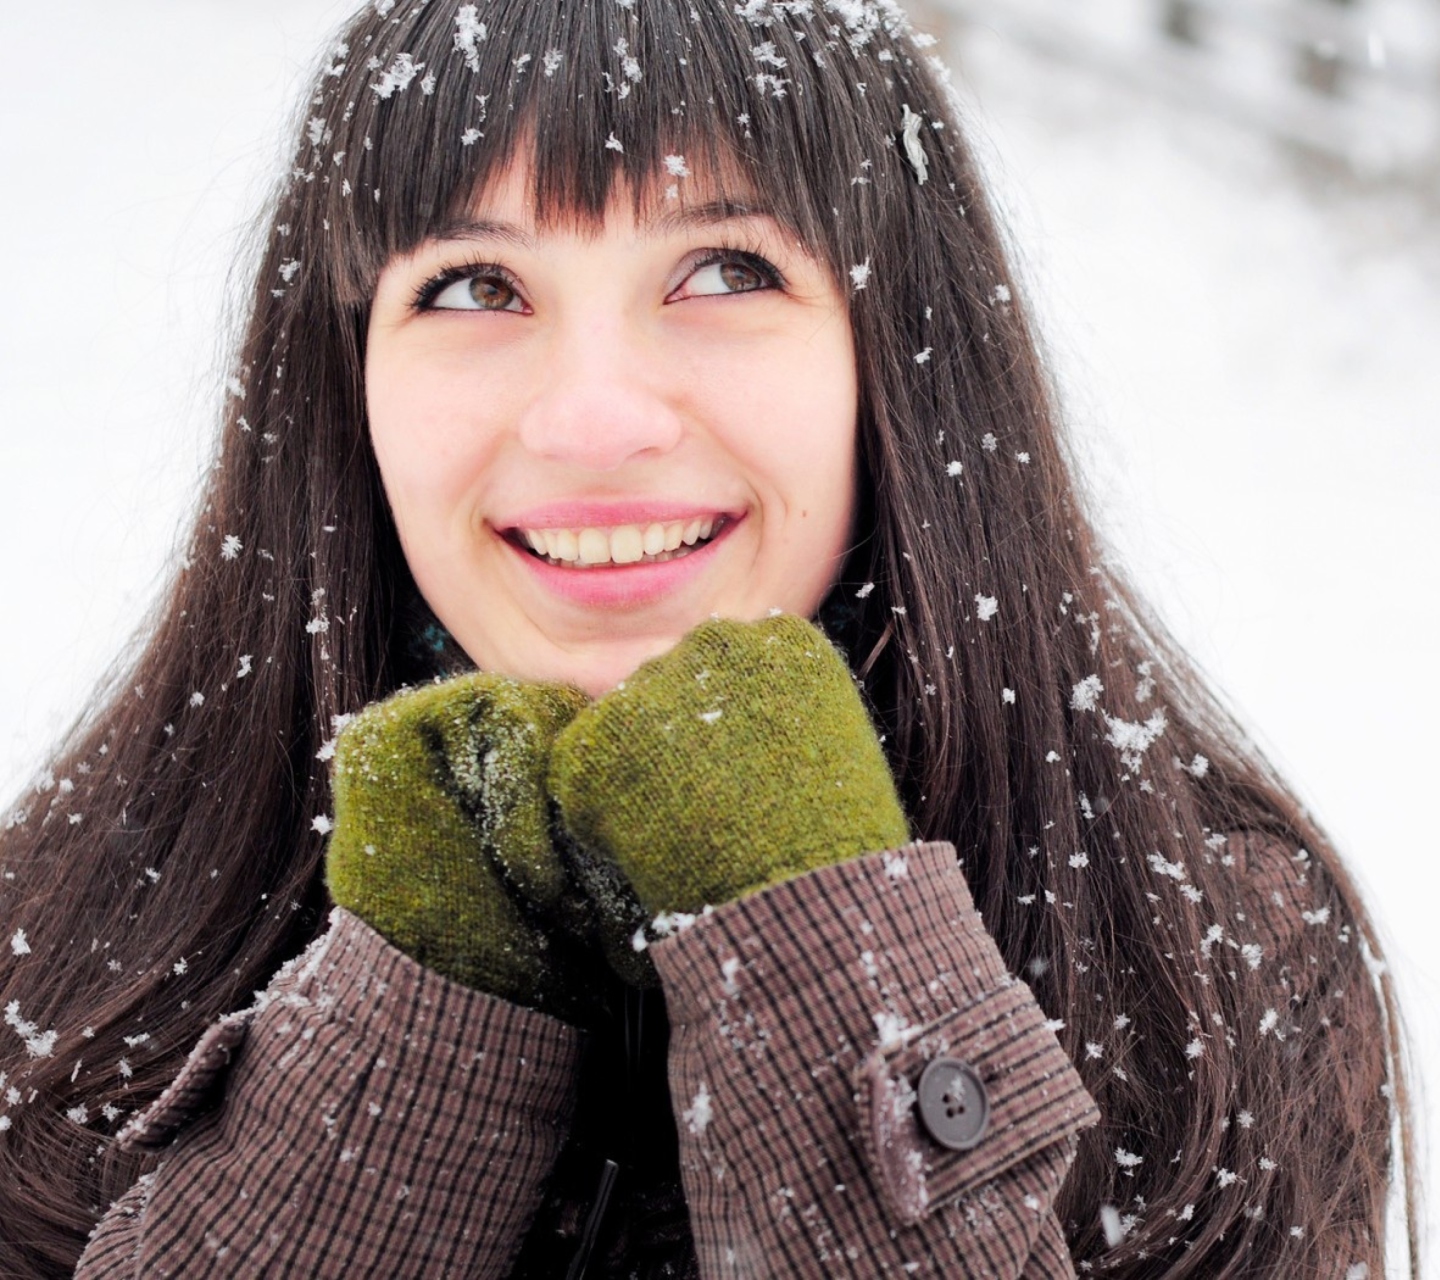 Brunette With Green Gloves In Snow screenshot #1 1440x1280